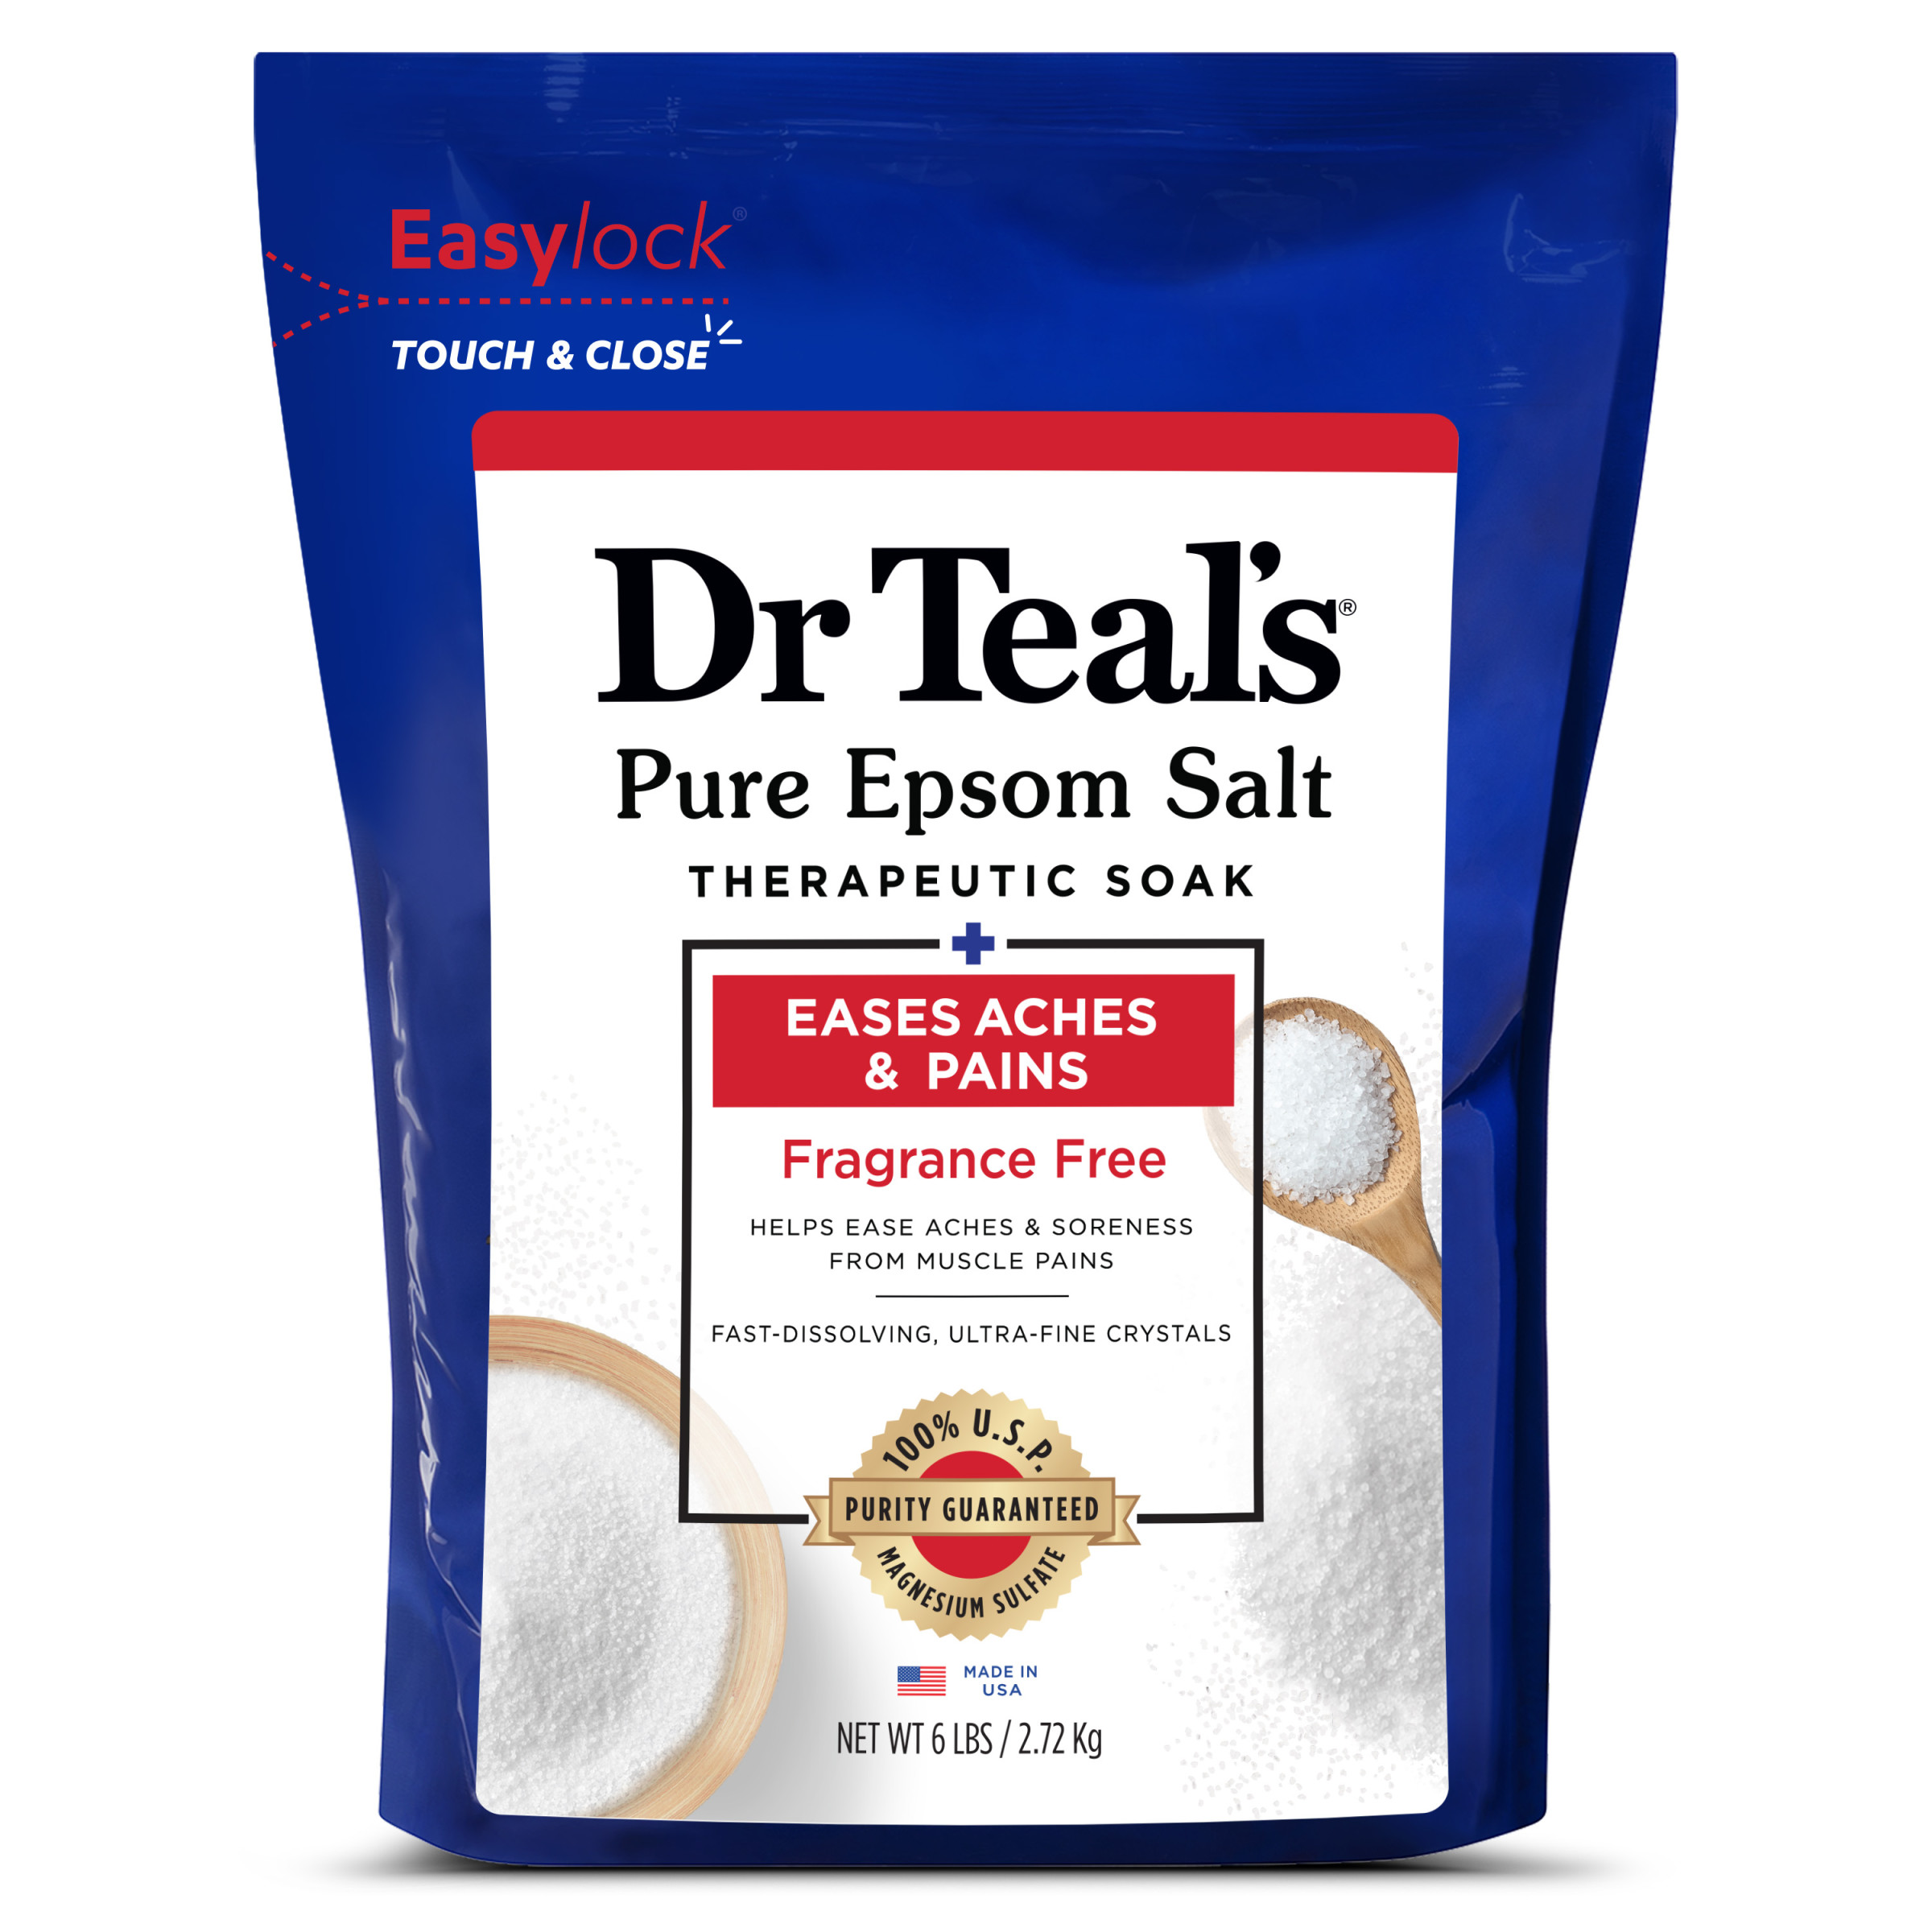 Dr Teal's Pure Epsom Salt Soak, Therapeutic, Fragrance Free, 6 lbs - image 3 of 9